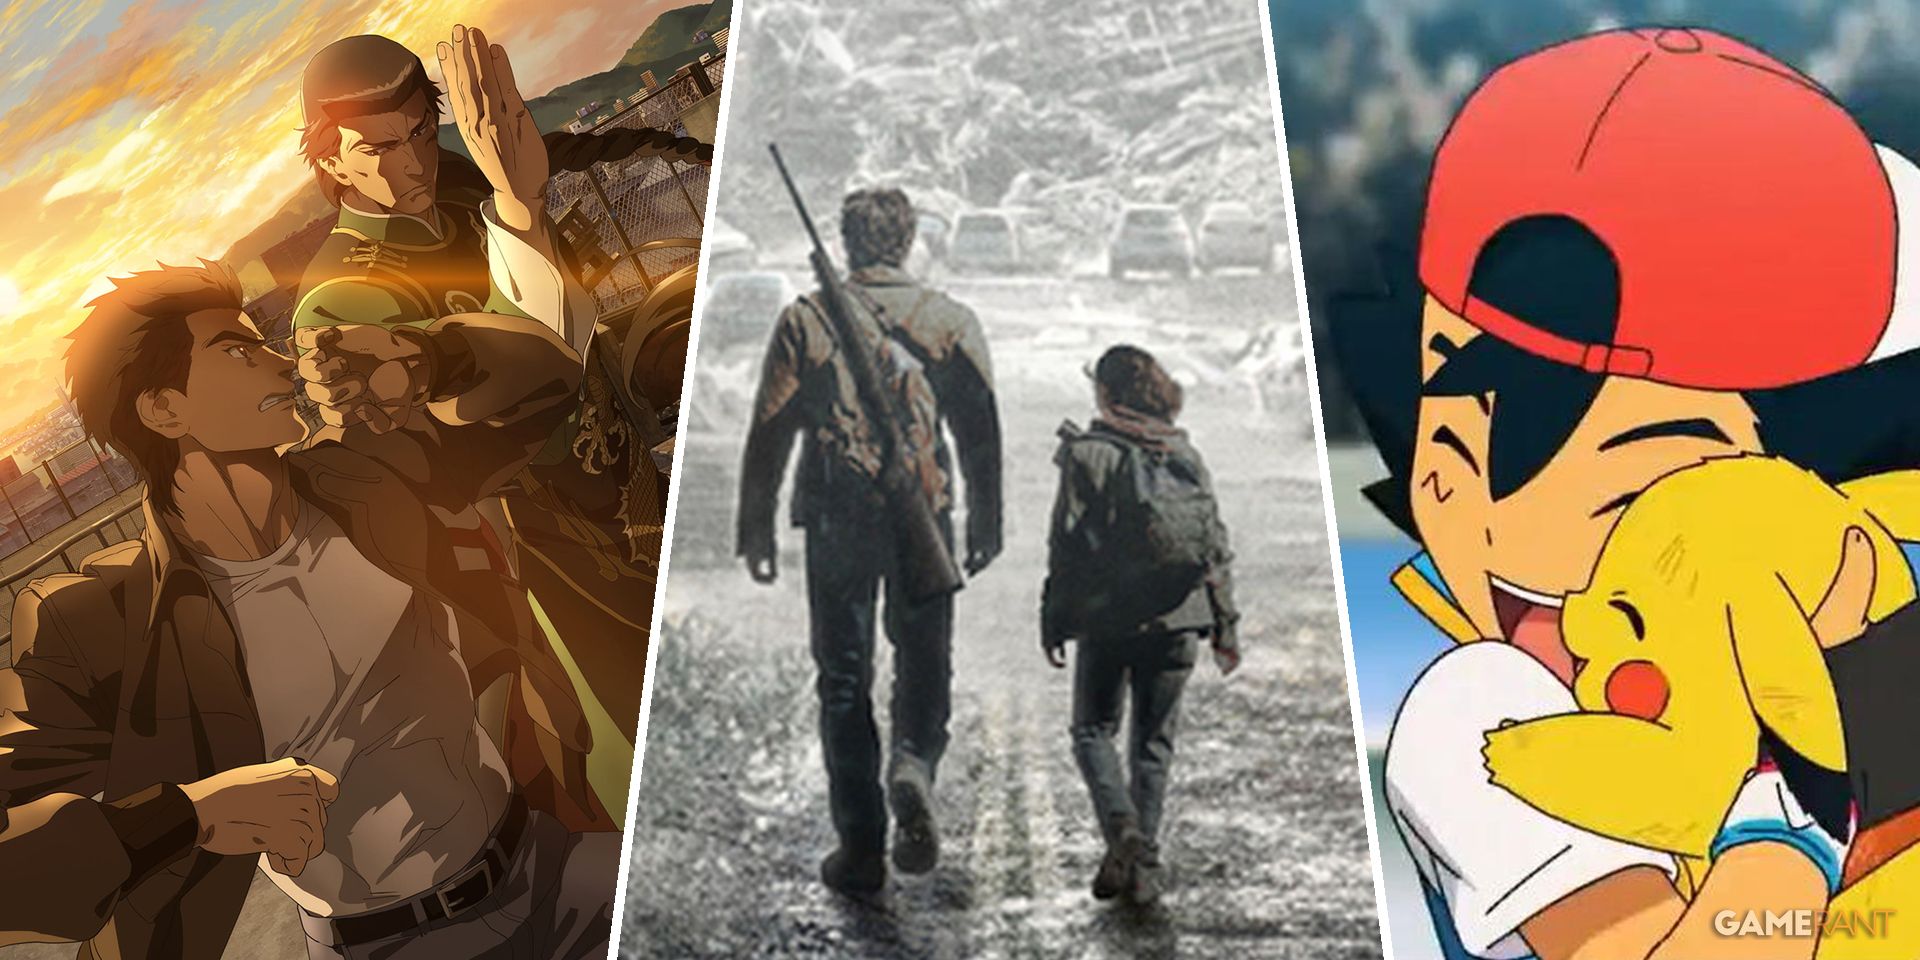 Shenmue: The Animation, HBO's The Last of Us series, and the Pokemon anime